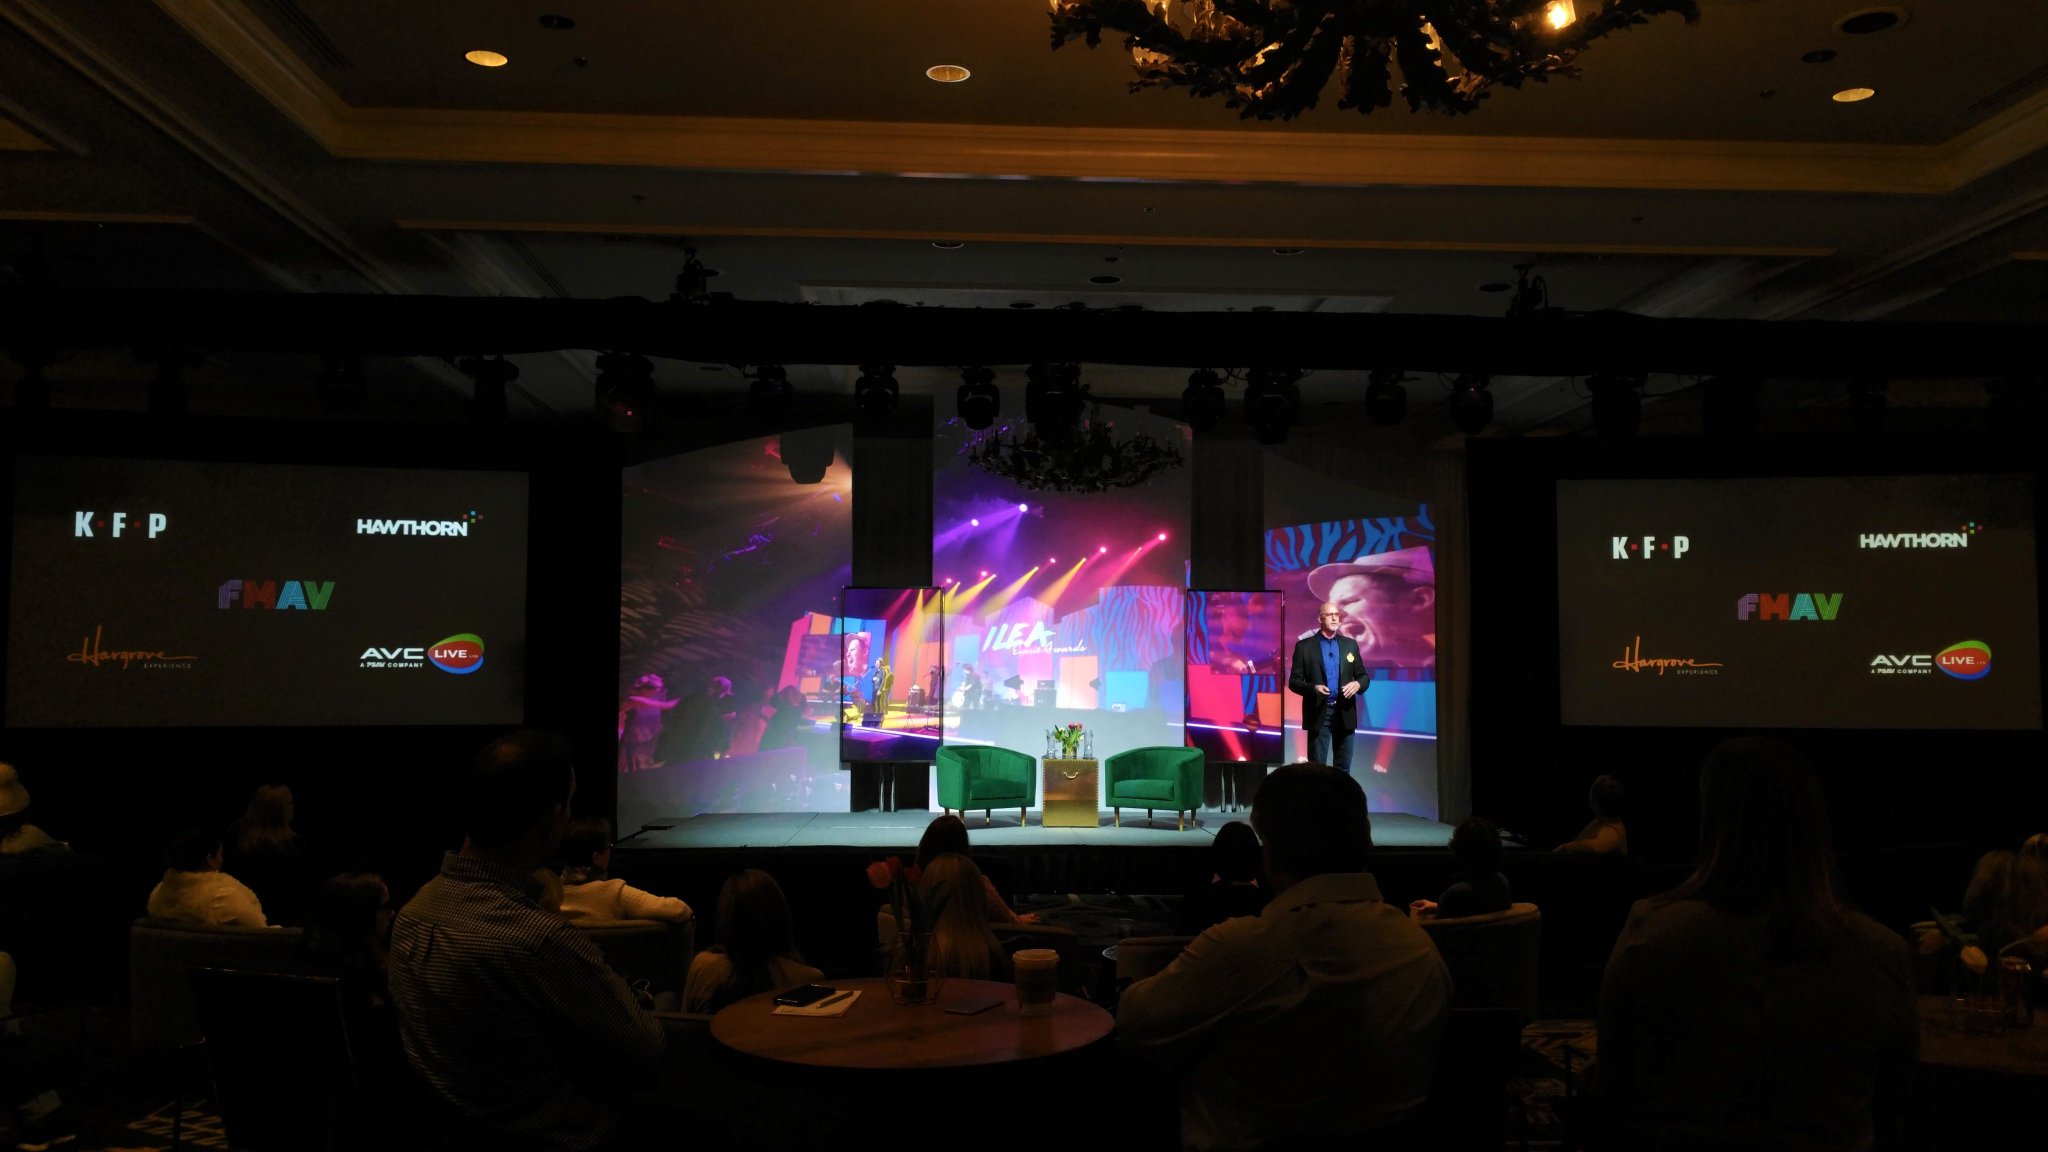 Psav On The Most Impactful Experiences Happen When We